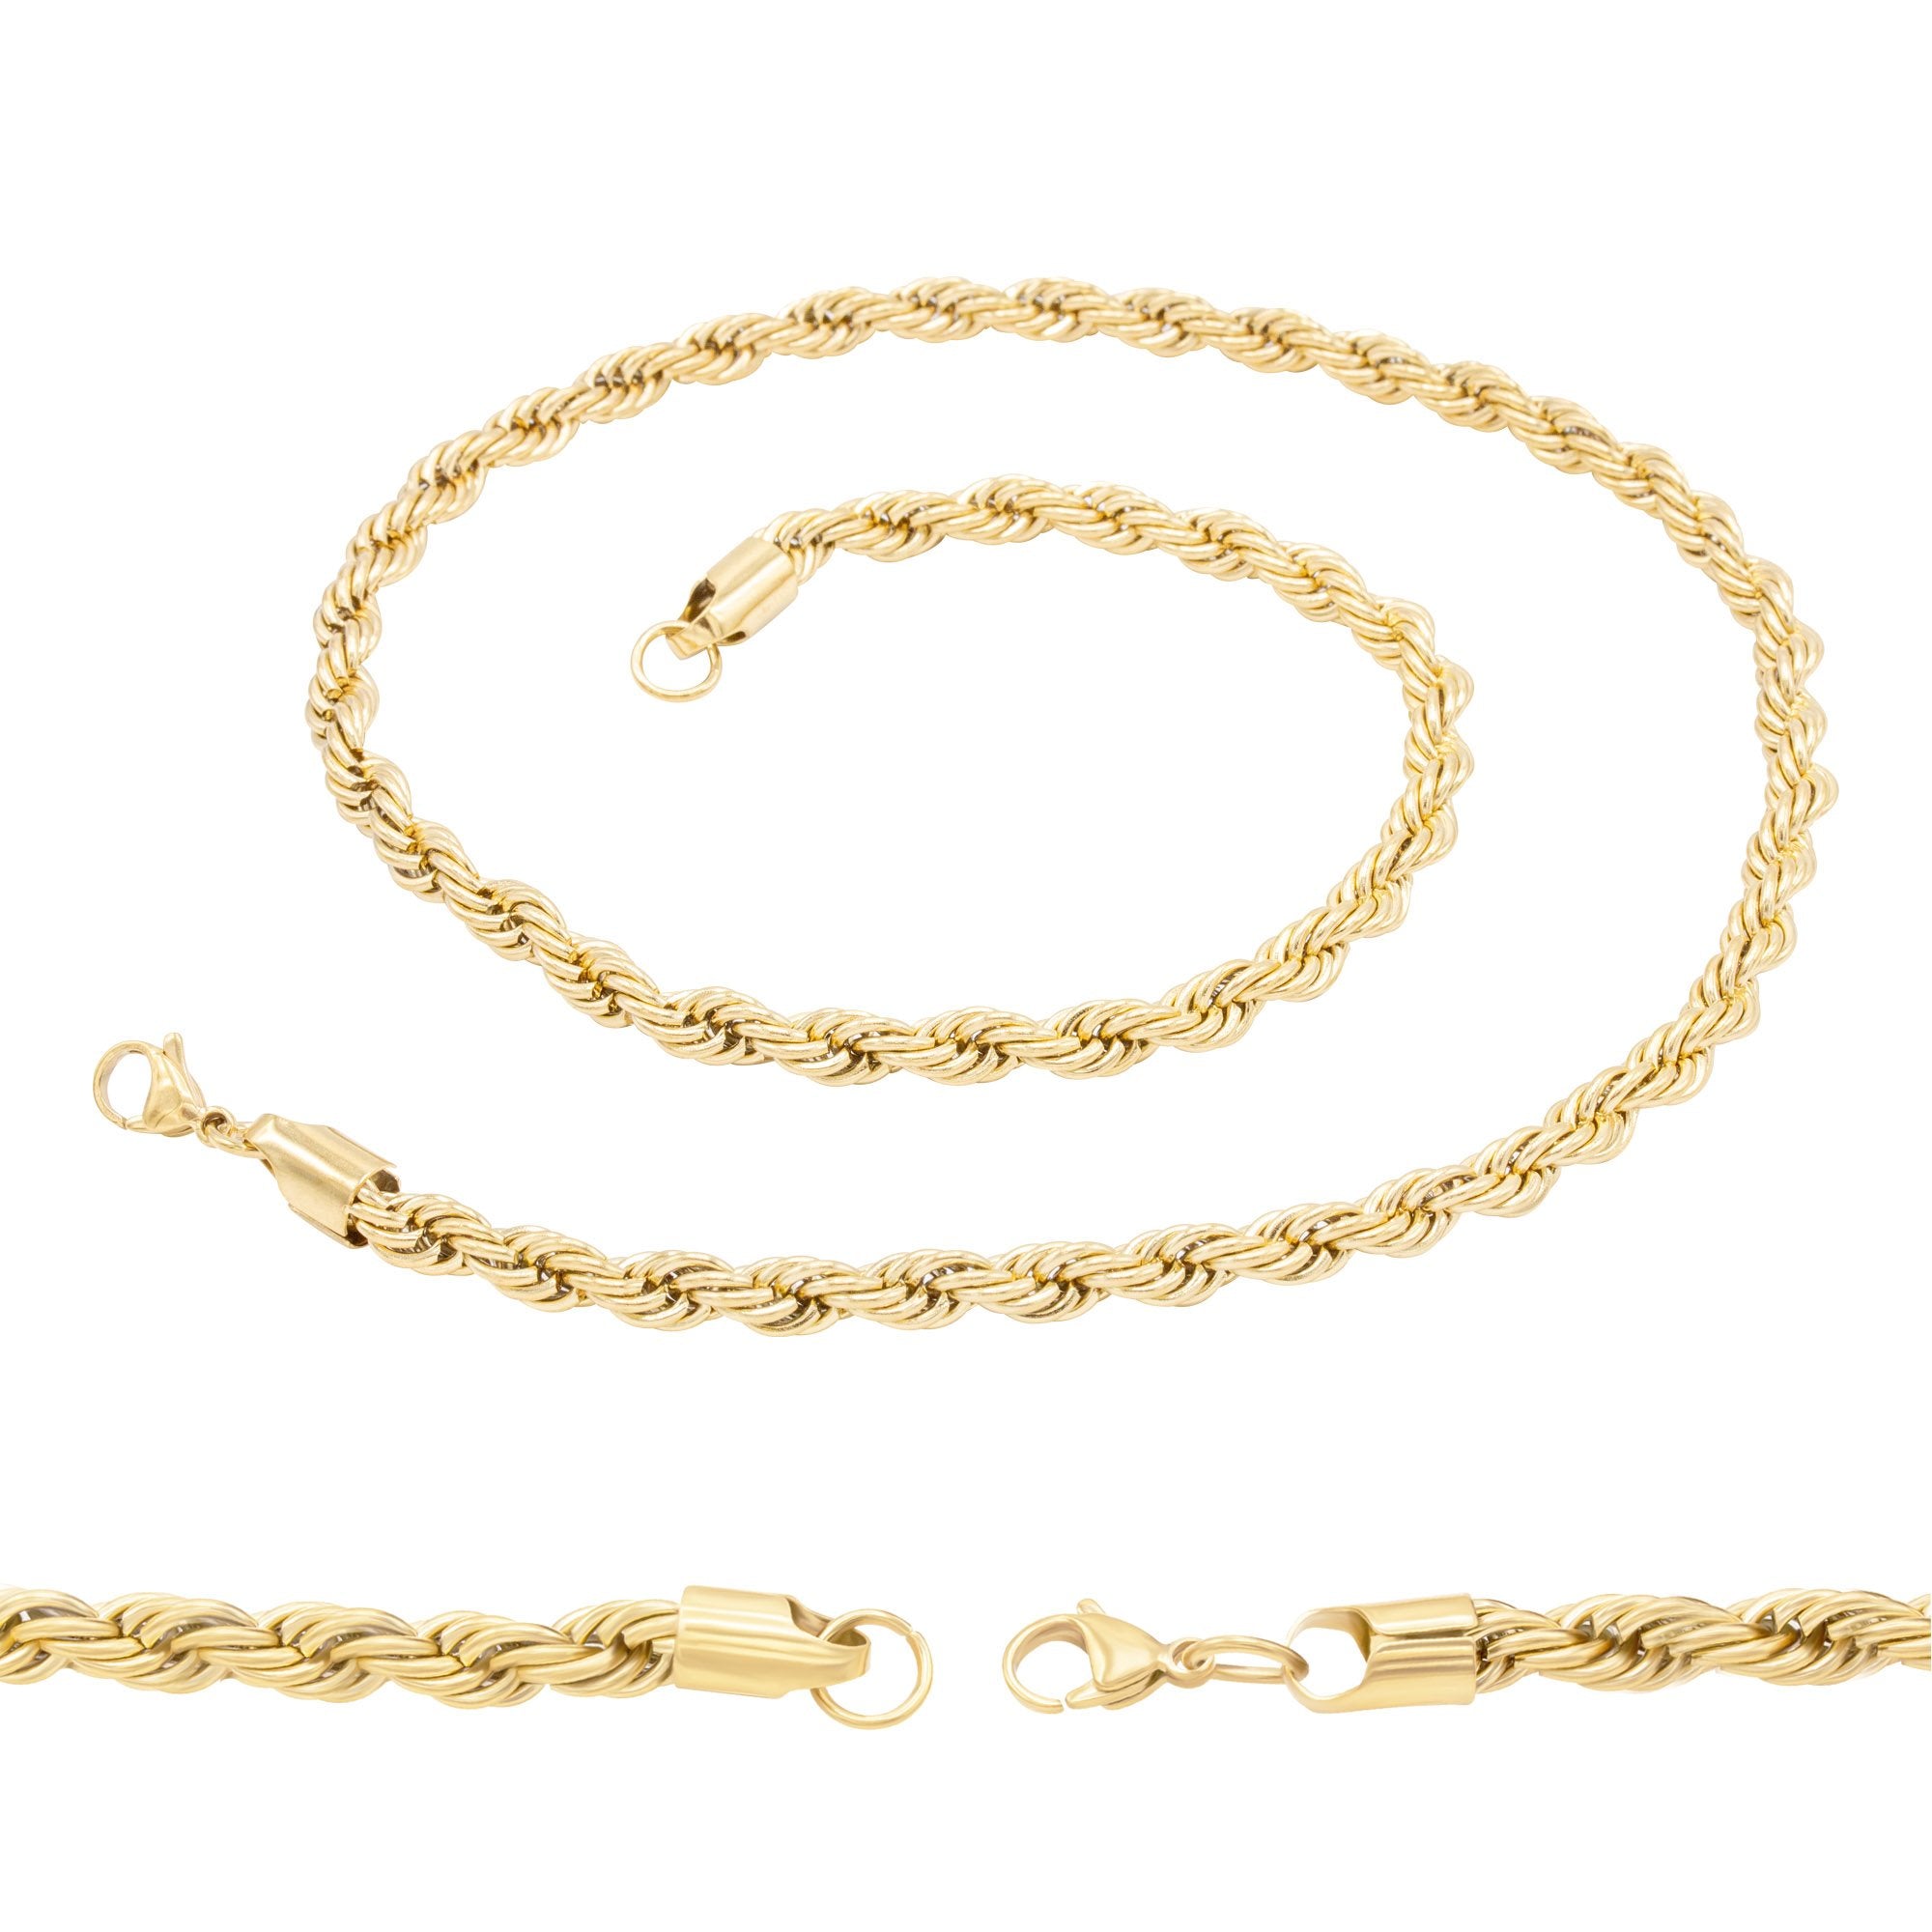 Solid 14k Yellow Gold Filled 6 mm Mariner Link Chain Necklace for Men and  Women (18, 20, 22, 24 or 30 inch)